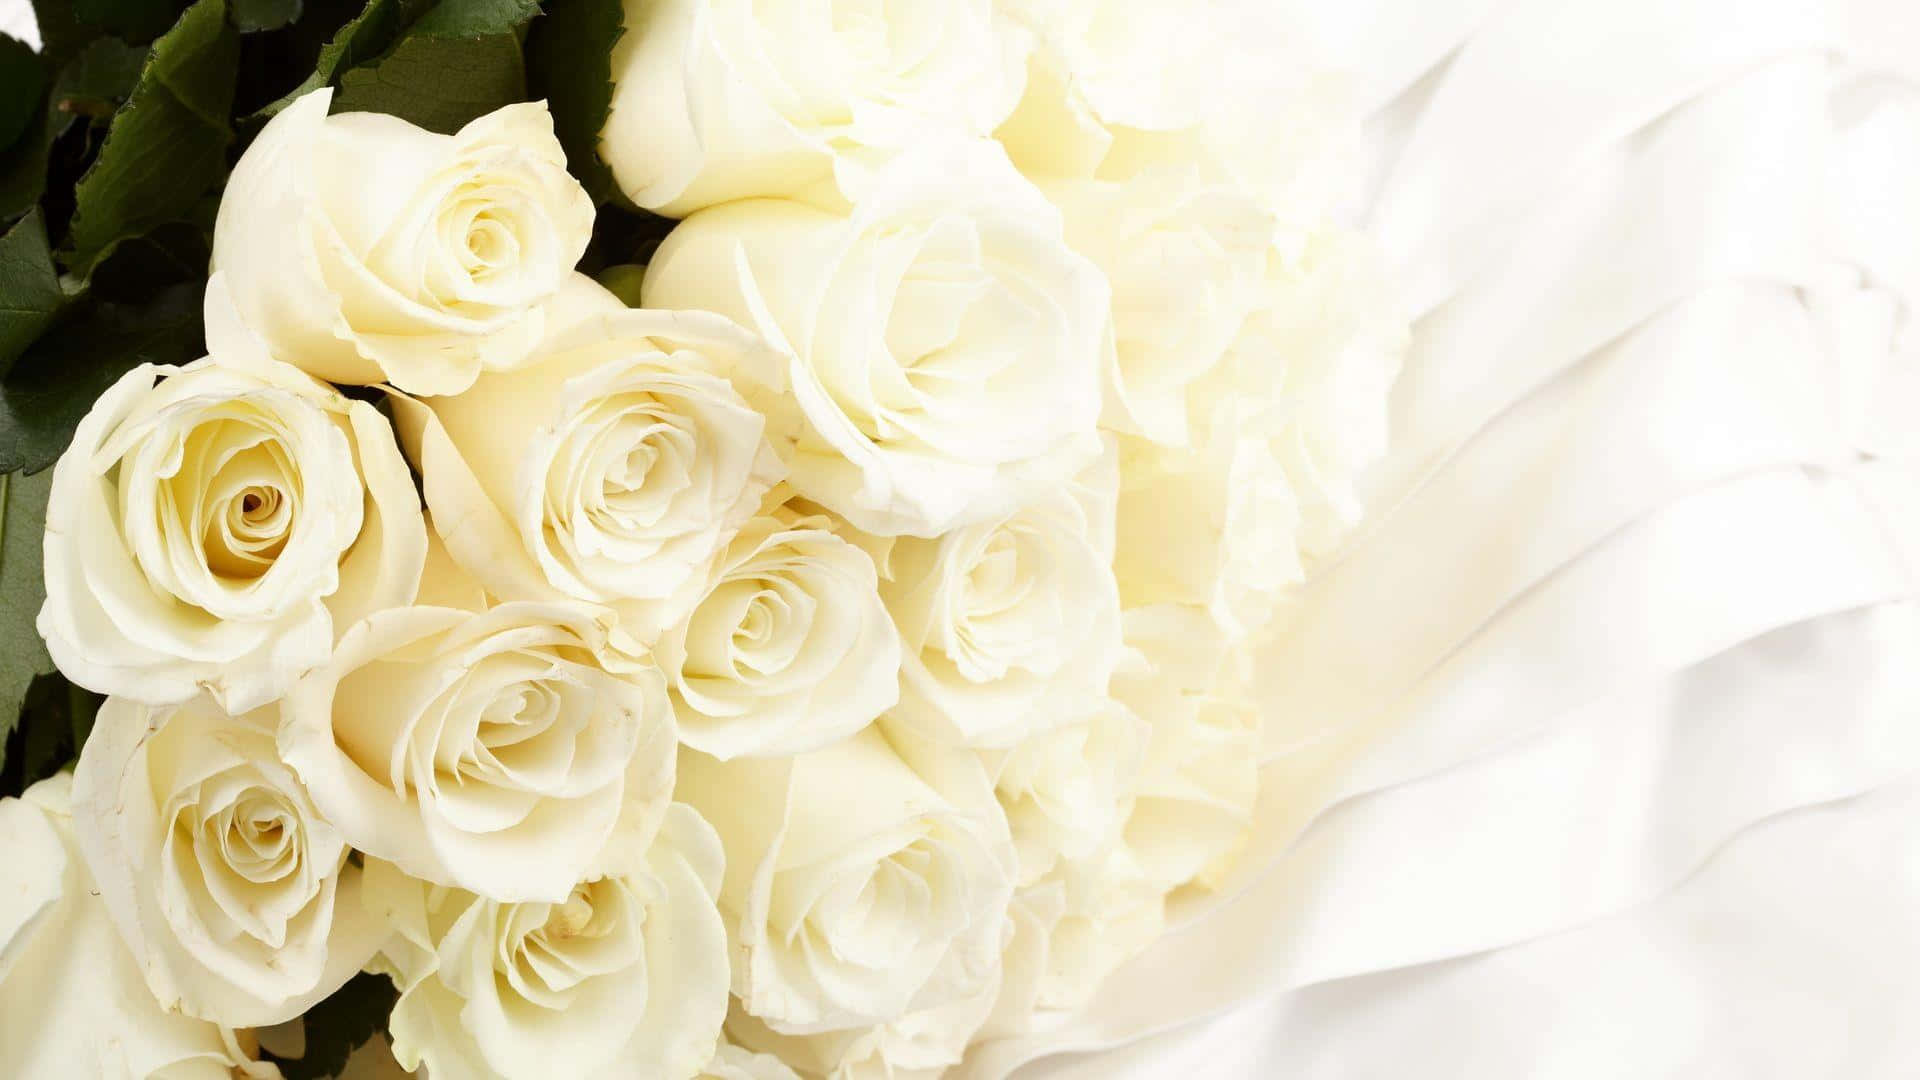 yellow and white roses wallpaper